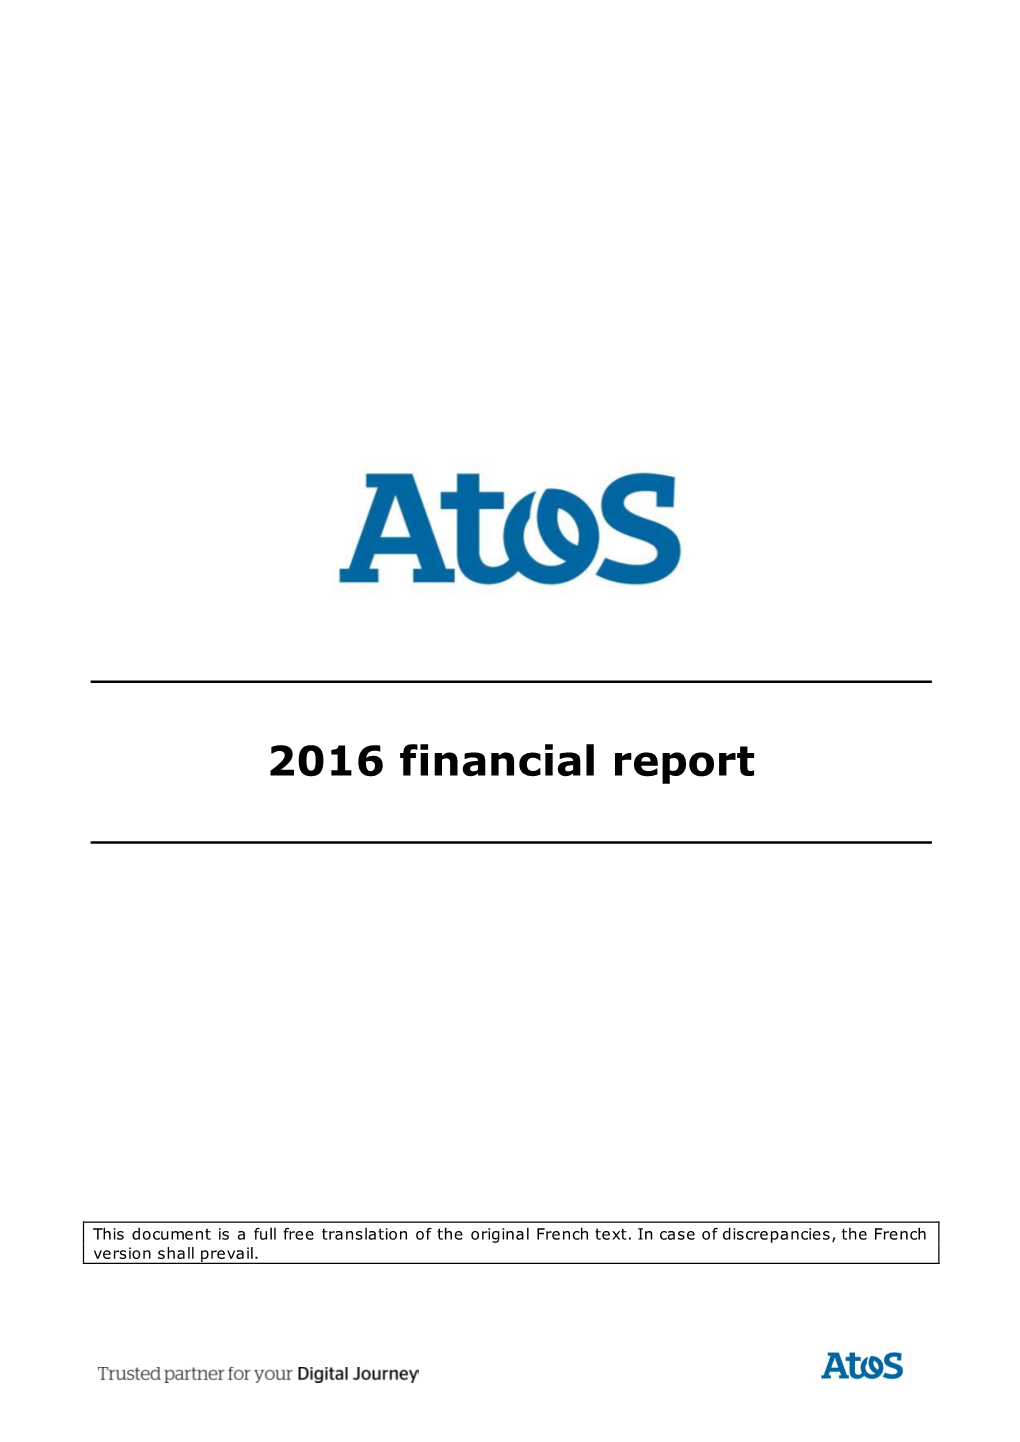 Atos SE (Societas Europaea) Is a Leader in Digital Transformation with Circa 100,000 Employees in 72 Countries and Pro Forma Annual Revenue of Circa € 12 Billion